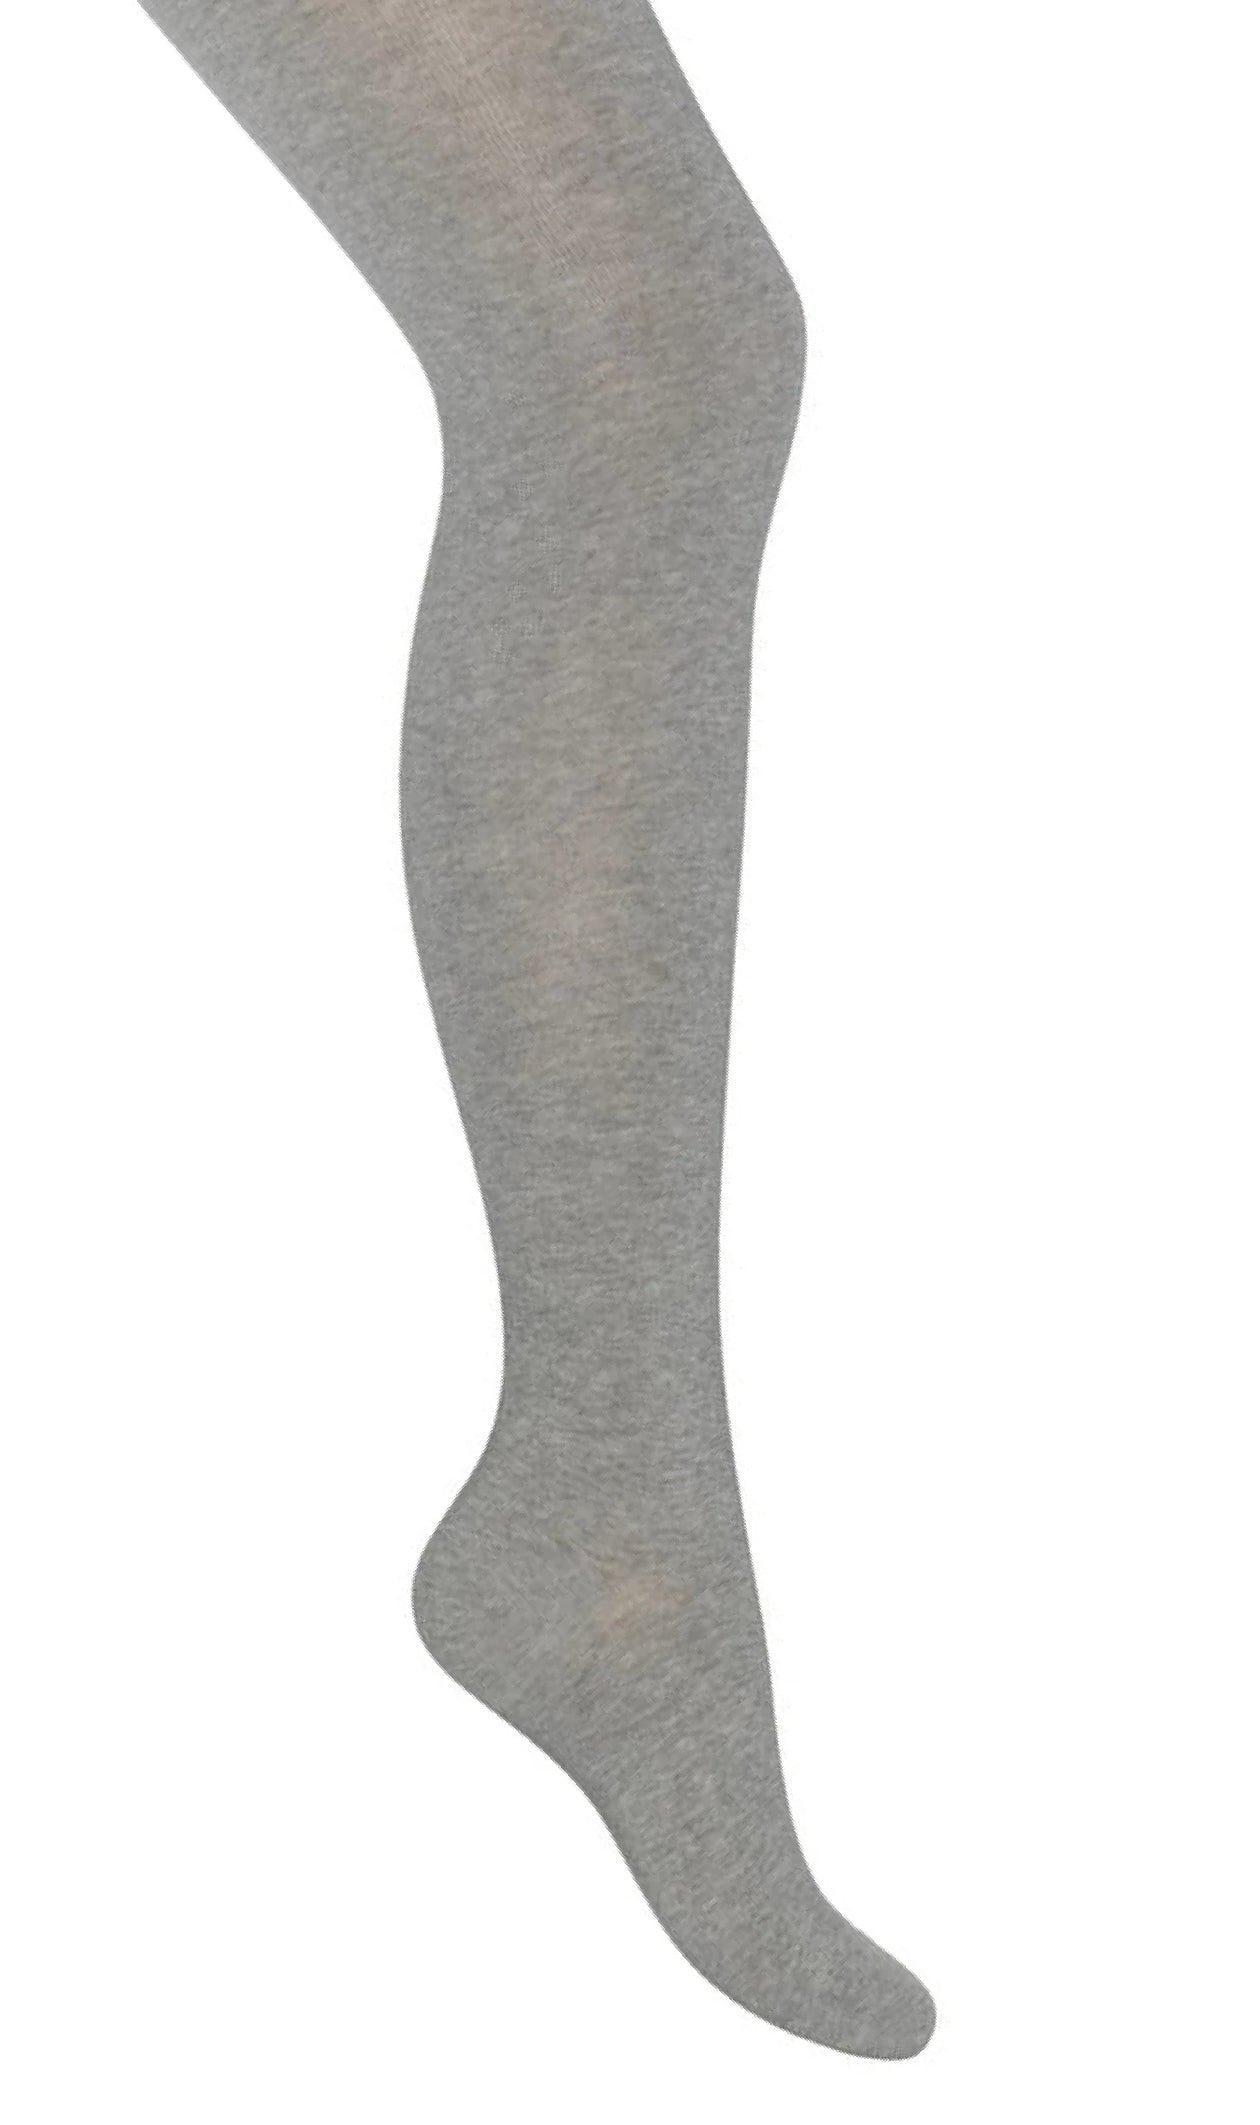 Bonnie Doon Cotton Tights - light grey knitted Winter thermal warm tights